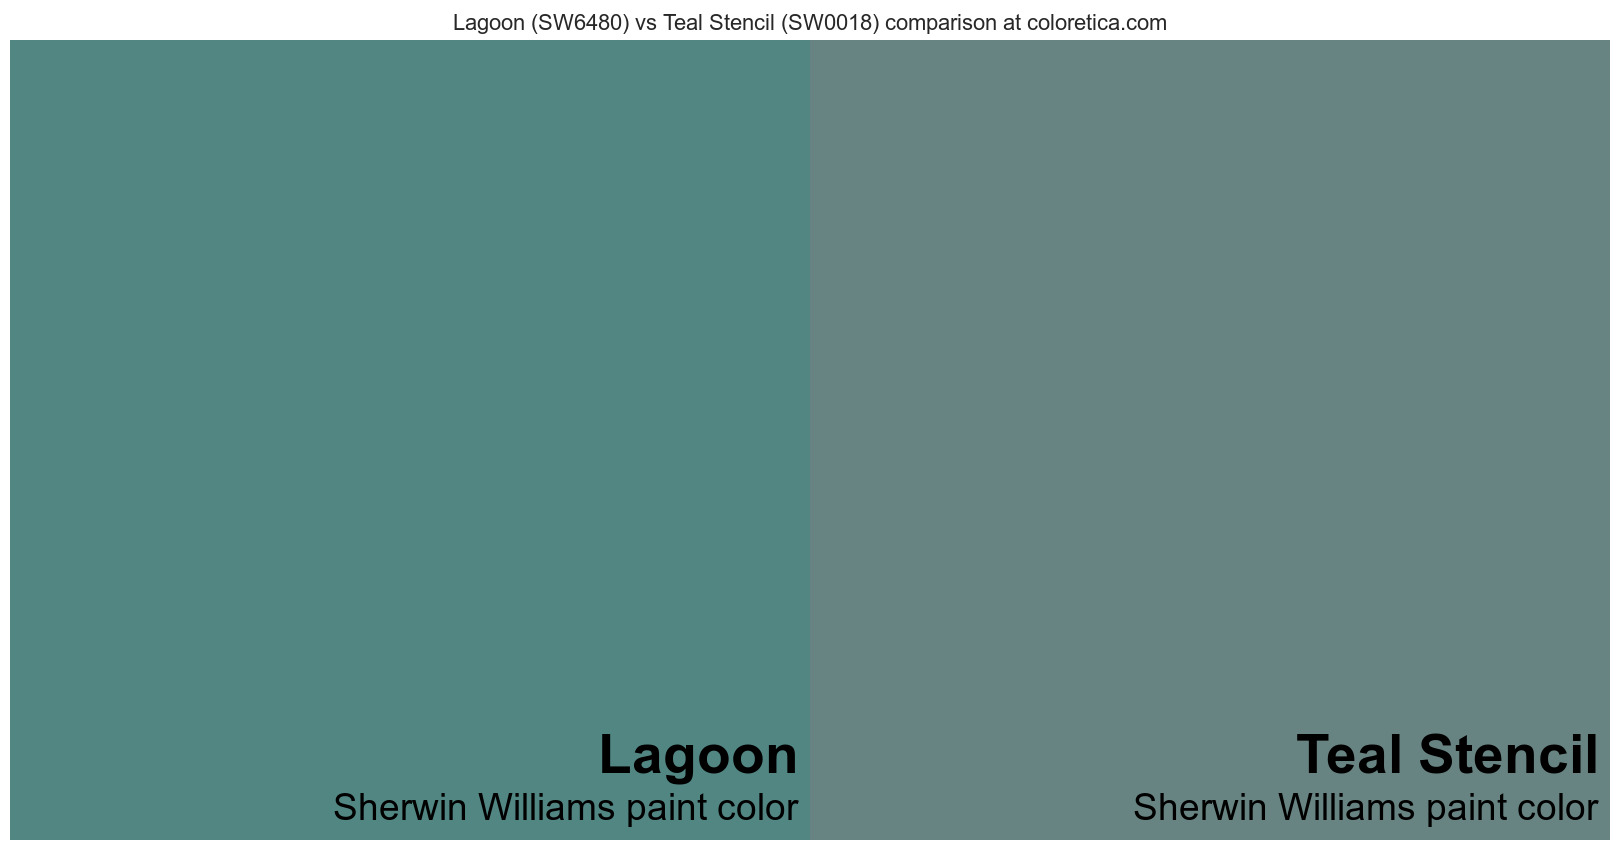 sherwin-williams-lagoon-vs-teal-stencil-color-side-by-side